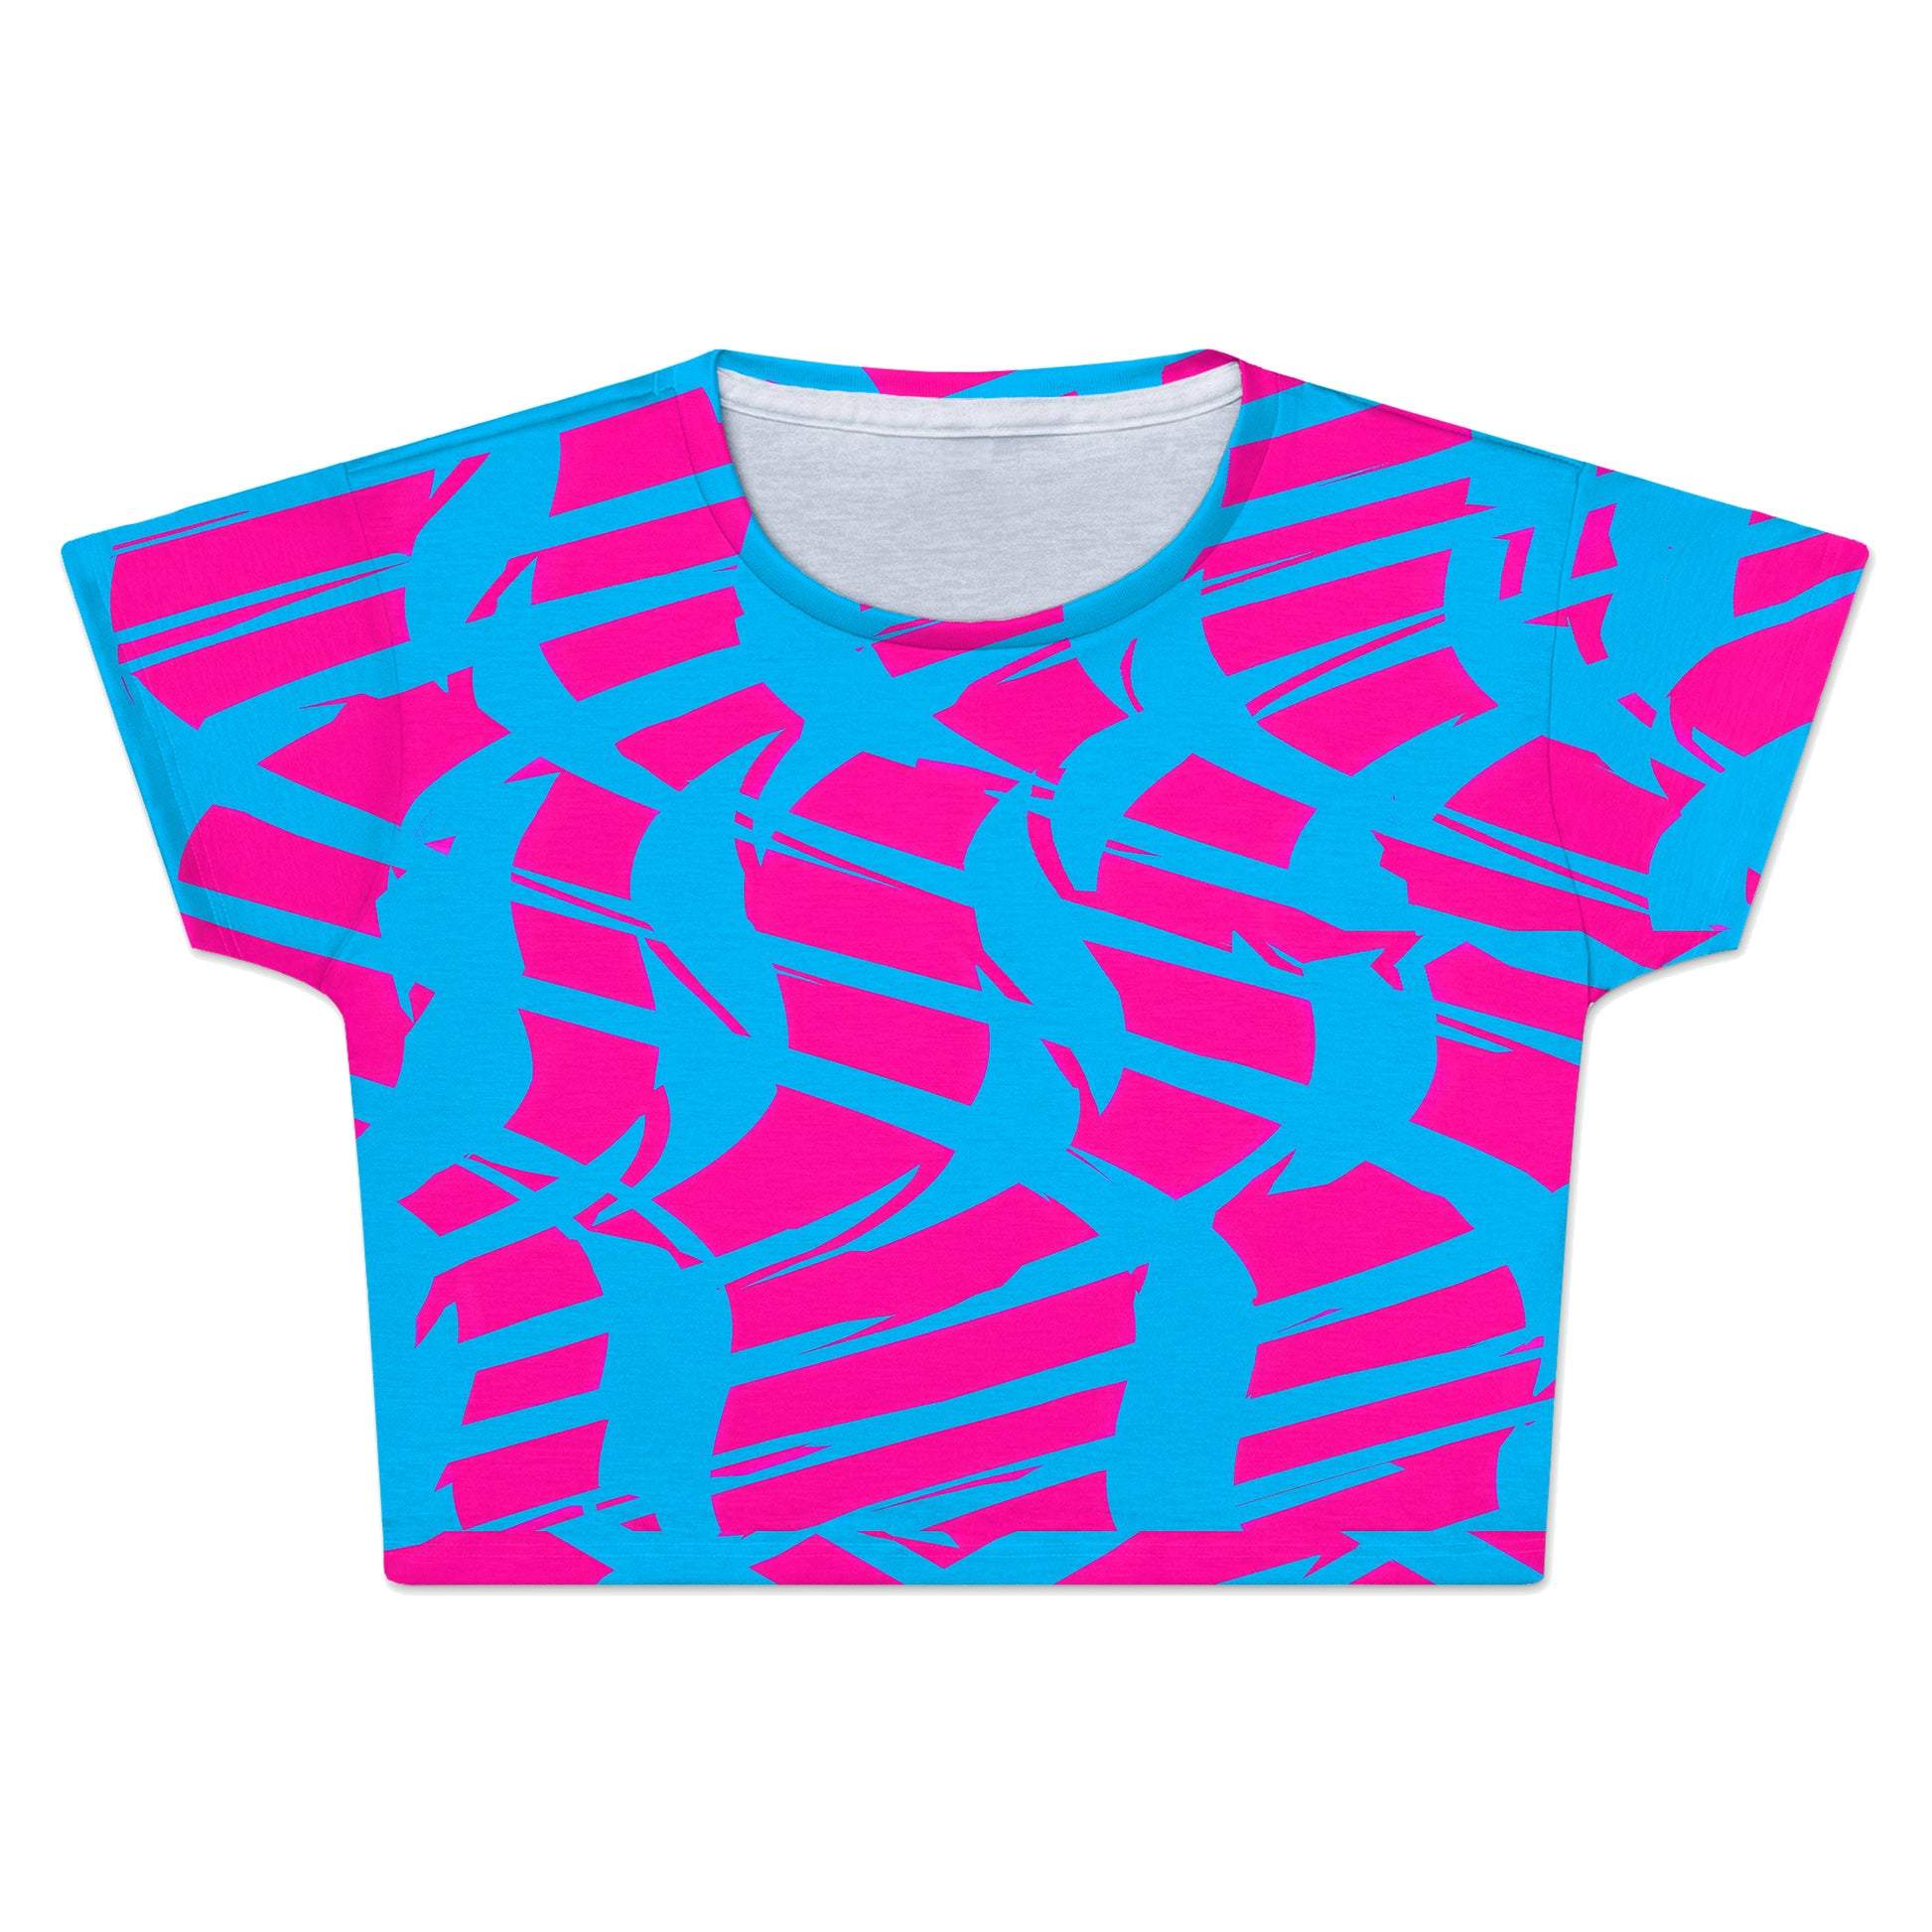 Pink and Blue Squiggly Rave Checkered Crop Tee, Big Tex Funkadelic, | iEDM